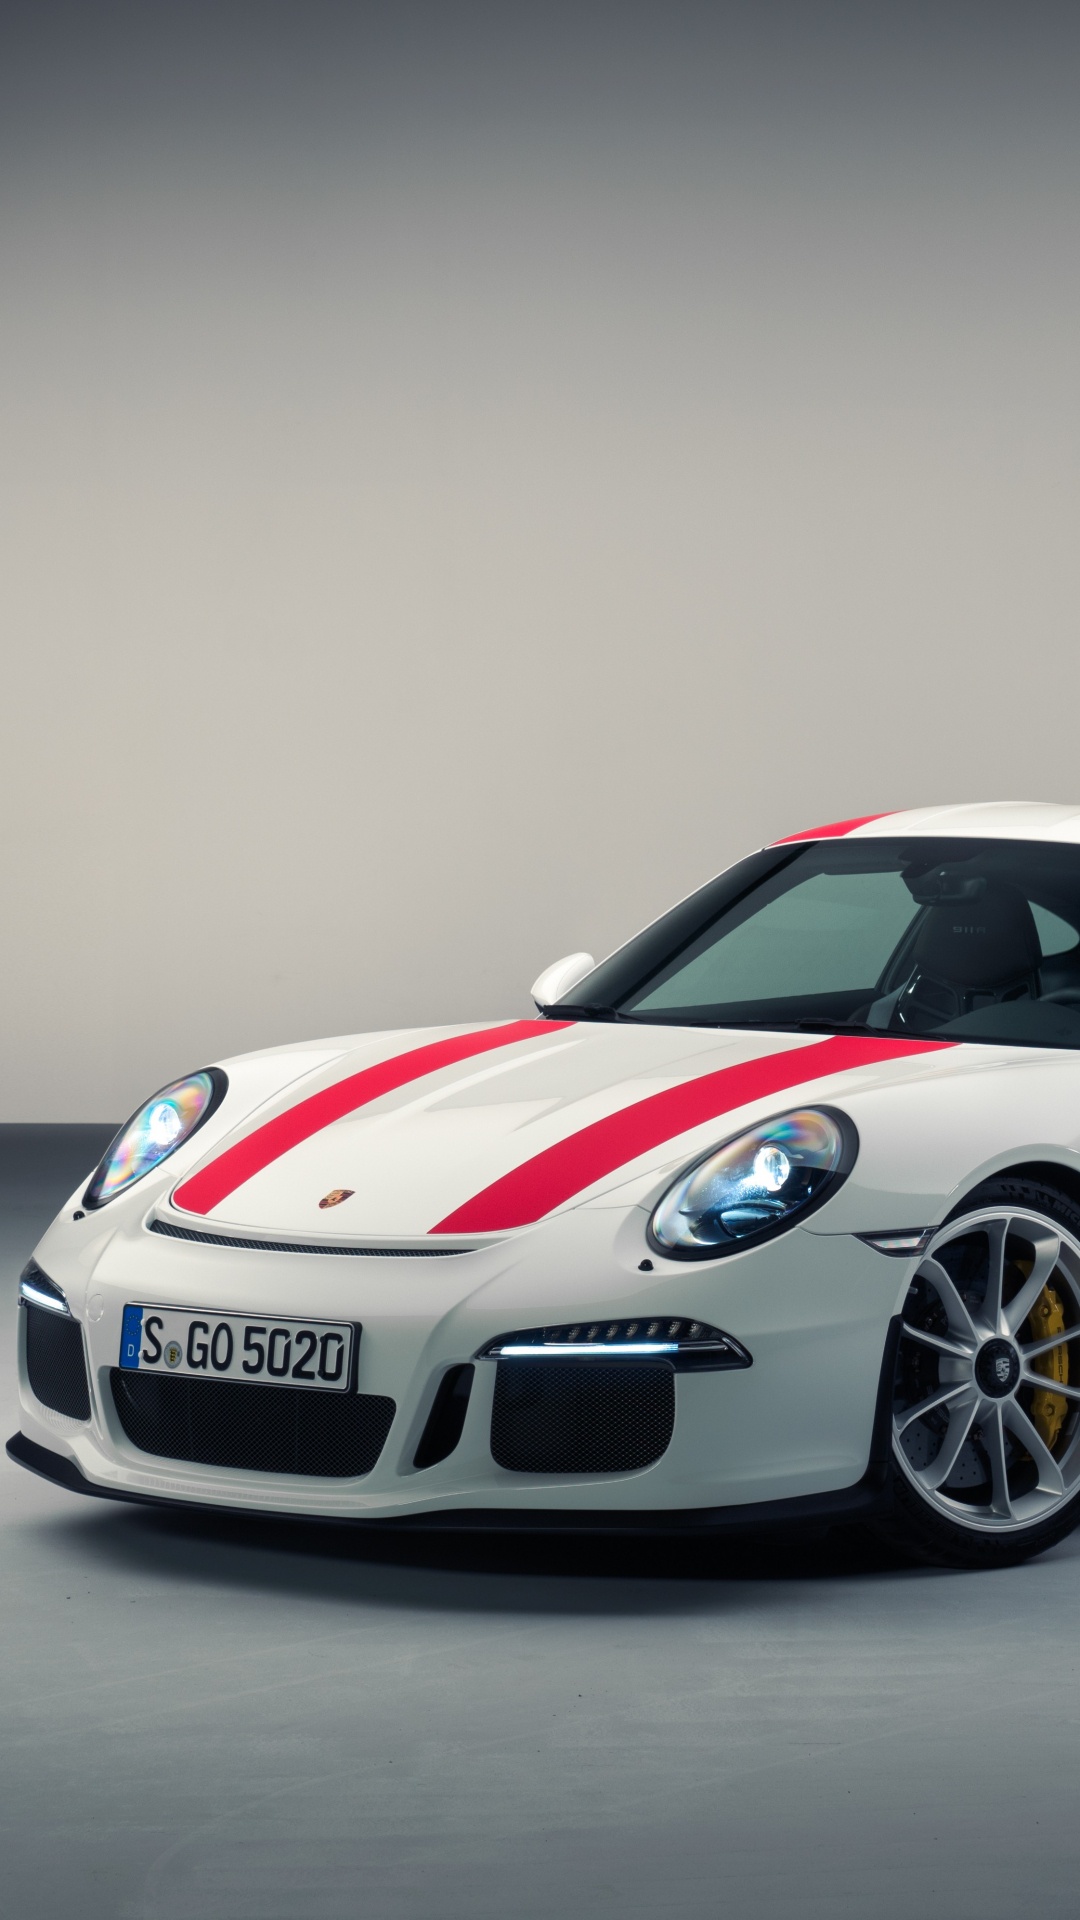 White and Red Porsche 911. Wallpaper in 1080x1920 Resolution